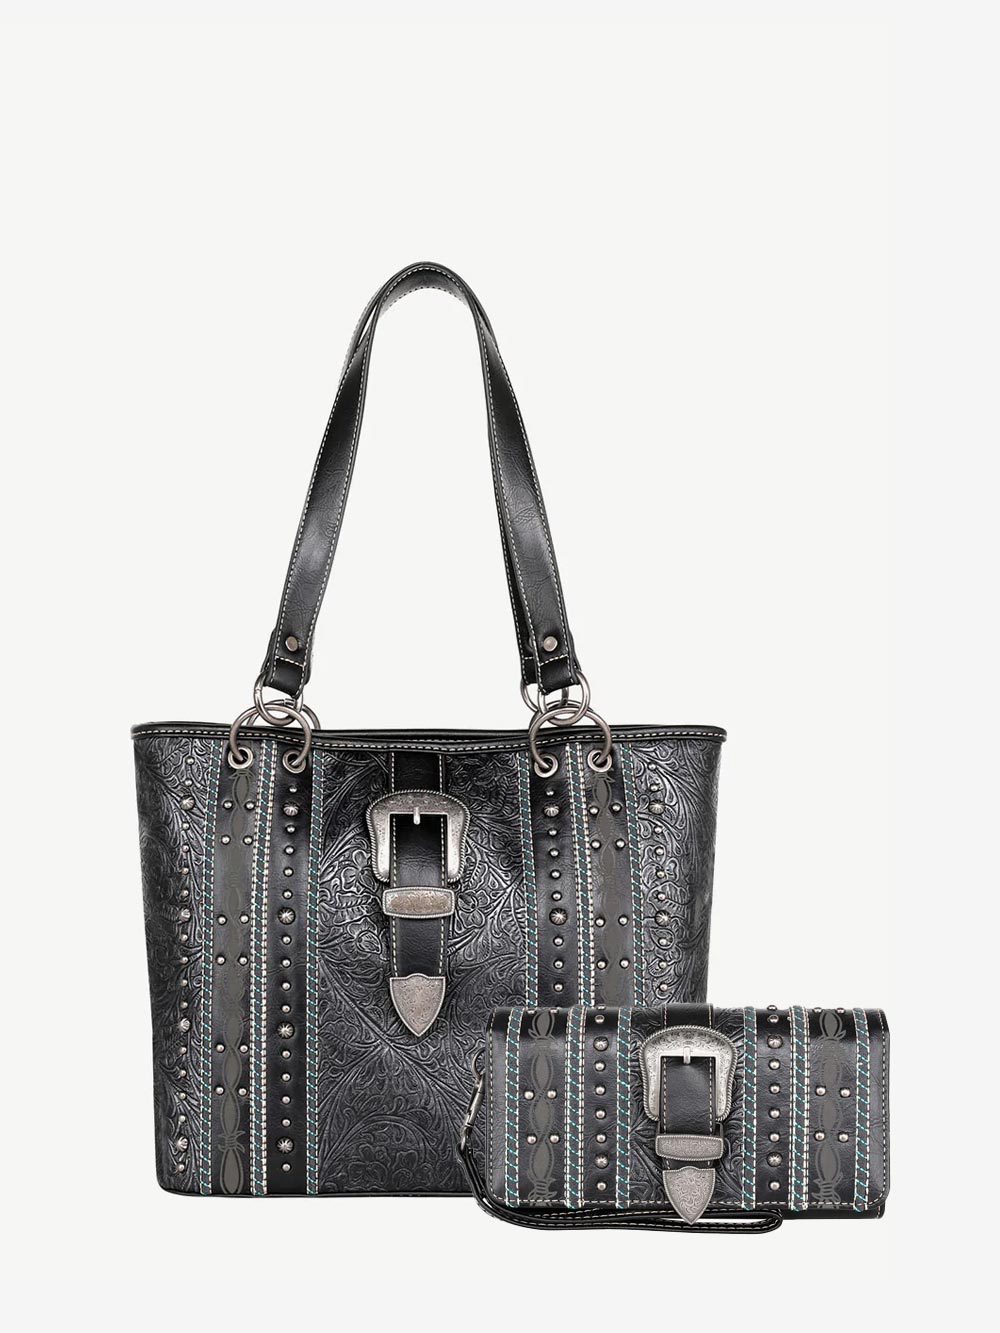 Montana West Buckle Floral Embossed Concealed Carry Tote Bag Collection - Montana West World